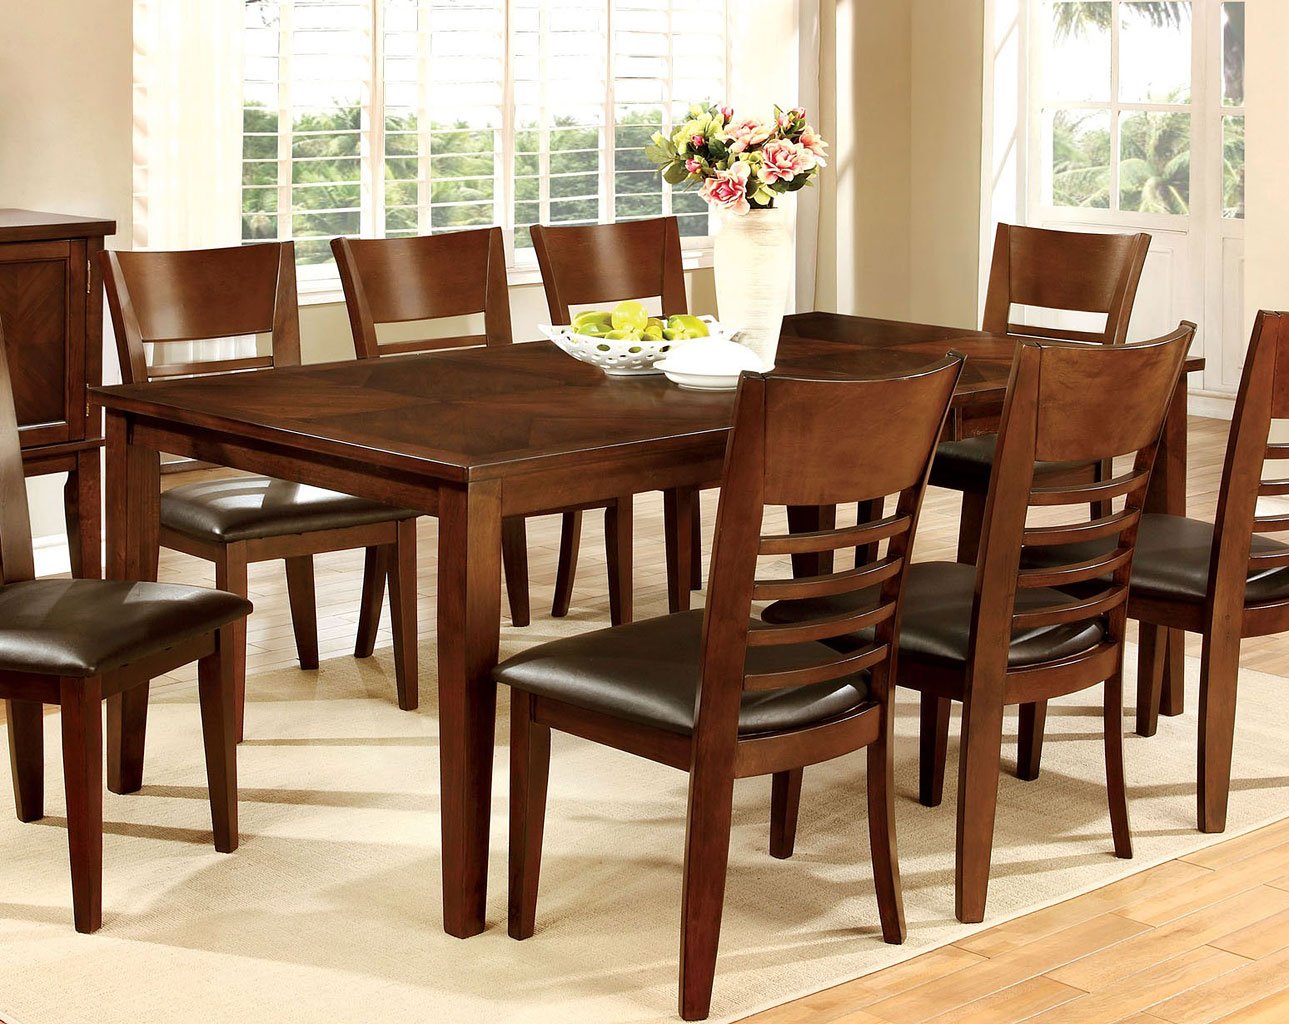 Dining Room Sets With Expandable Table